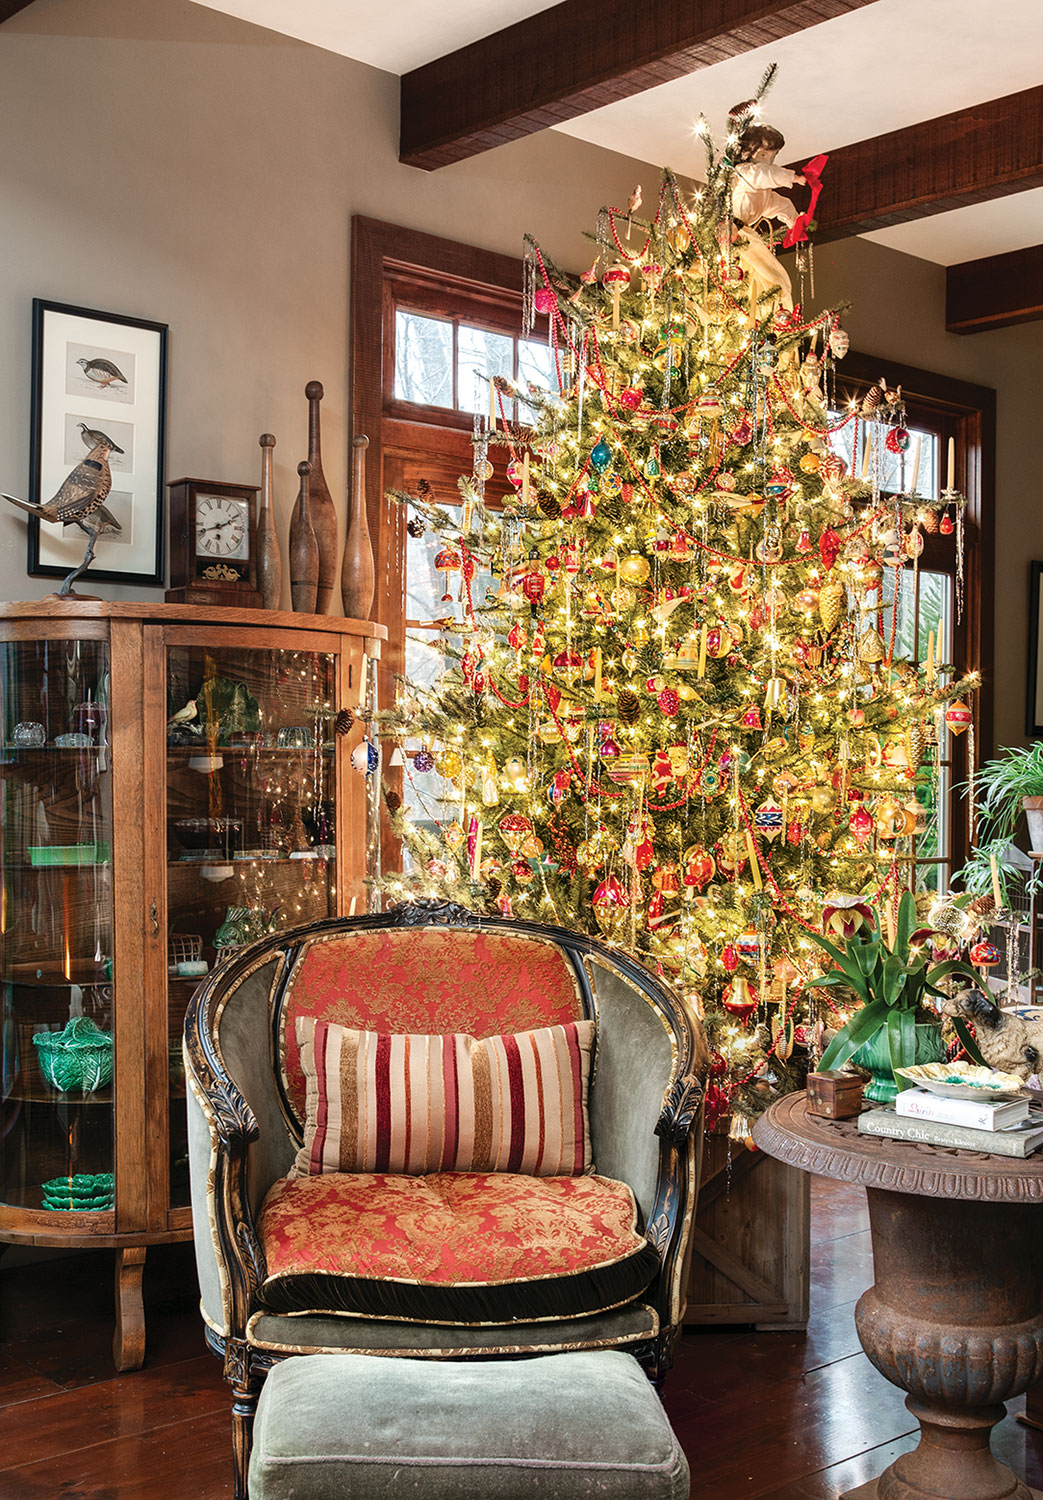 Living room vignette with an antique upholstered chair, antique wood and glass display cabinet, and a blue spruce covered in ornaments and white holiday lights